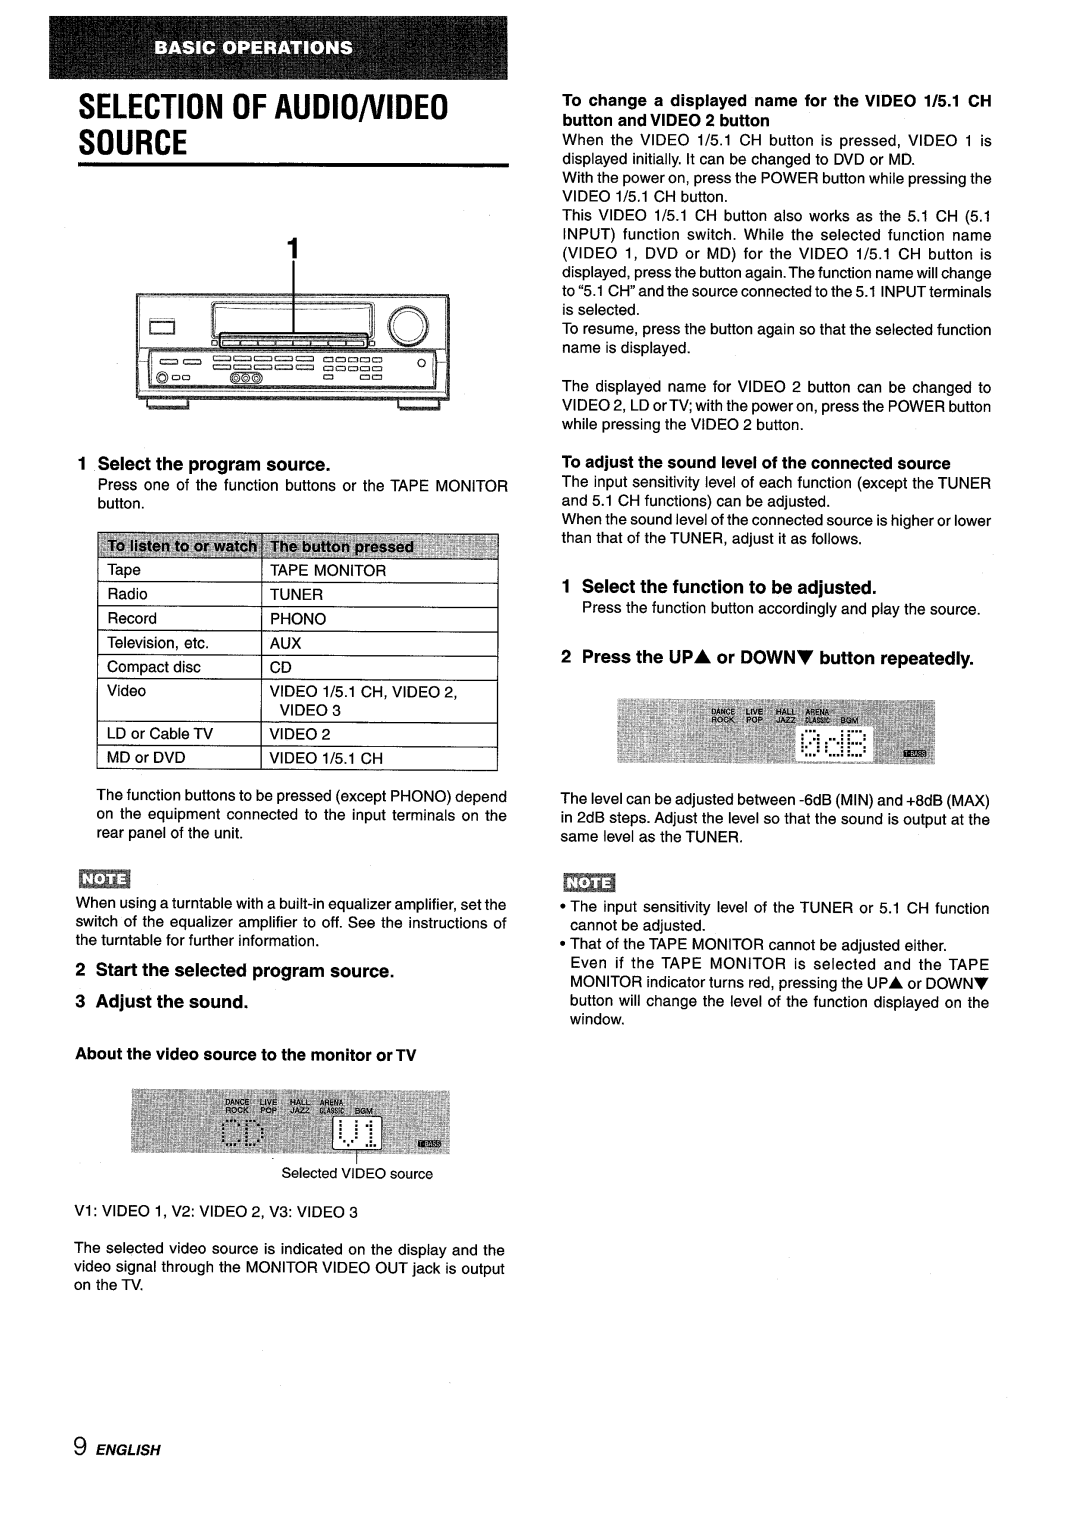 Aiwa AV-D25 manual Selection Of Audio/Video Source, Select the program source, Select the function to be adjusted 